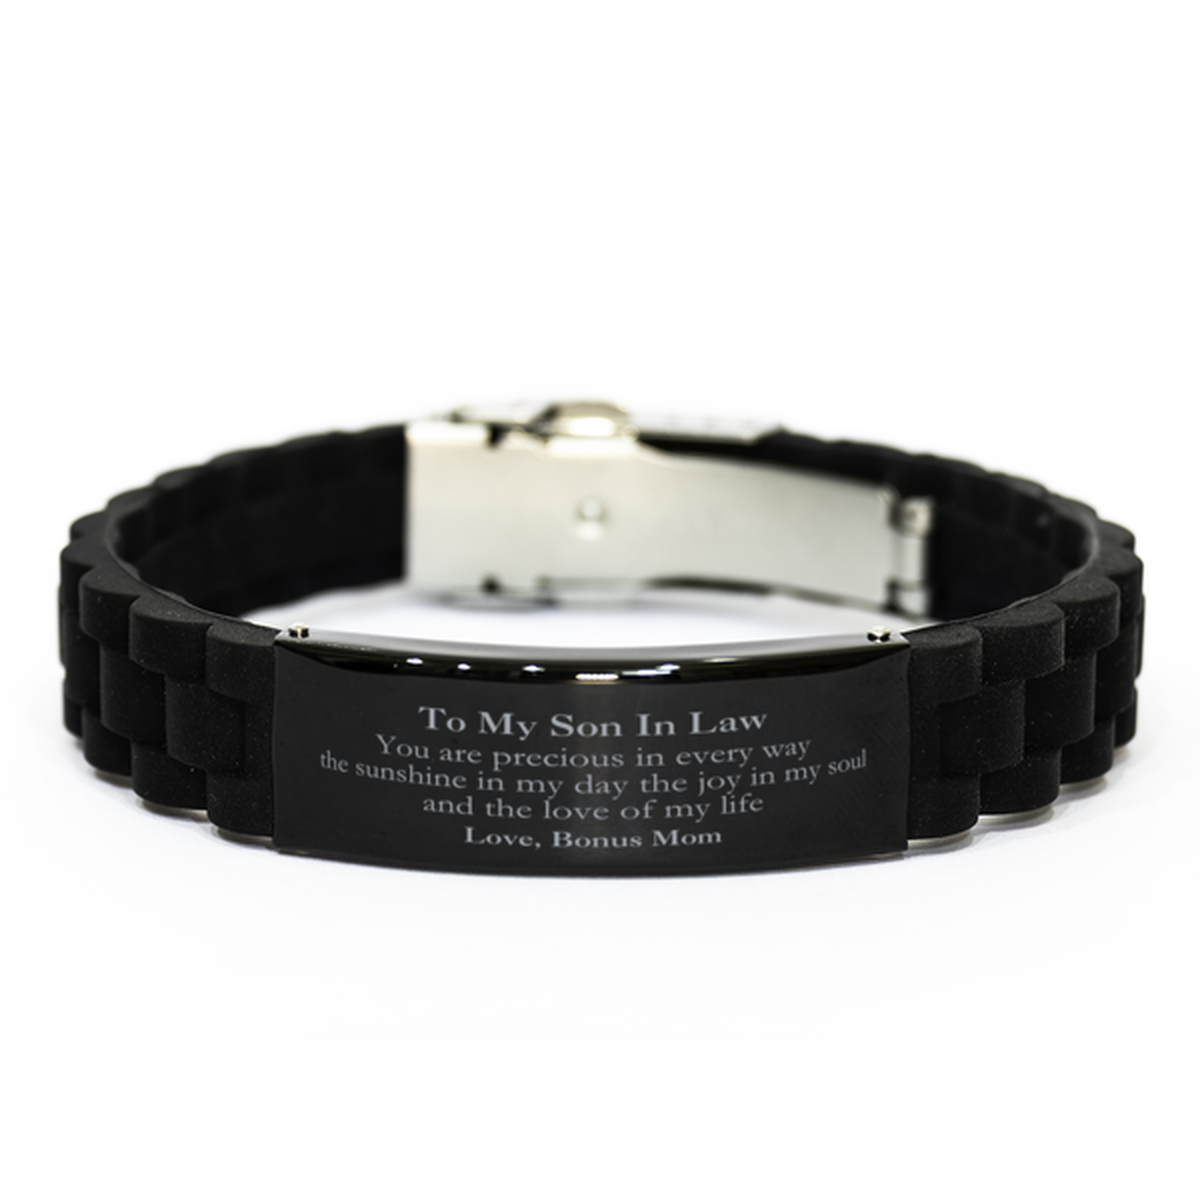 Graduation Gifts for Son In Law Black Glidelock Clasp Bracelet Present from Bonus Mom, Christmas Son In Law Birthday Gifts Son In Law You are precious in every way the sunshine in my day. Love, Bonus Mom